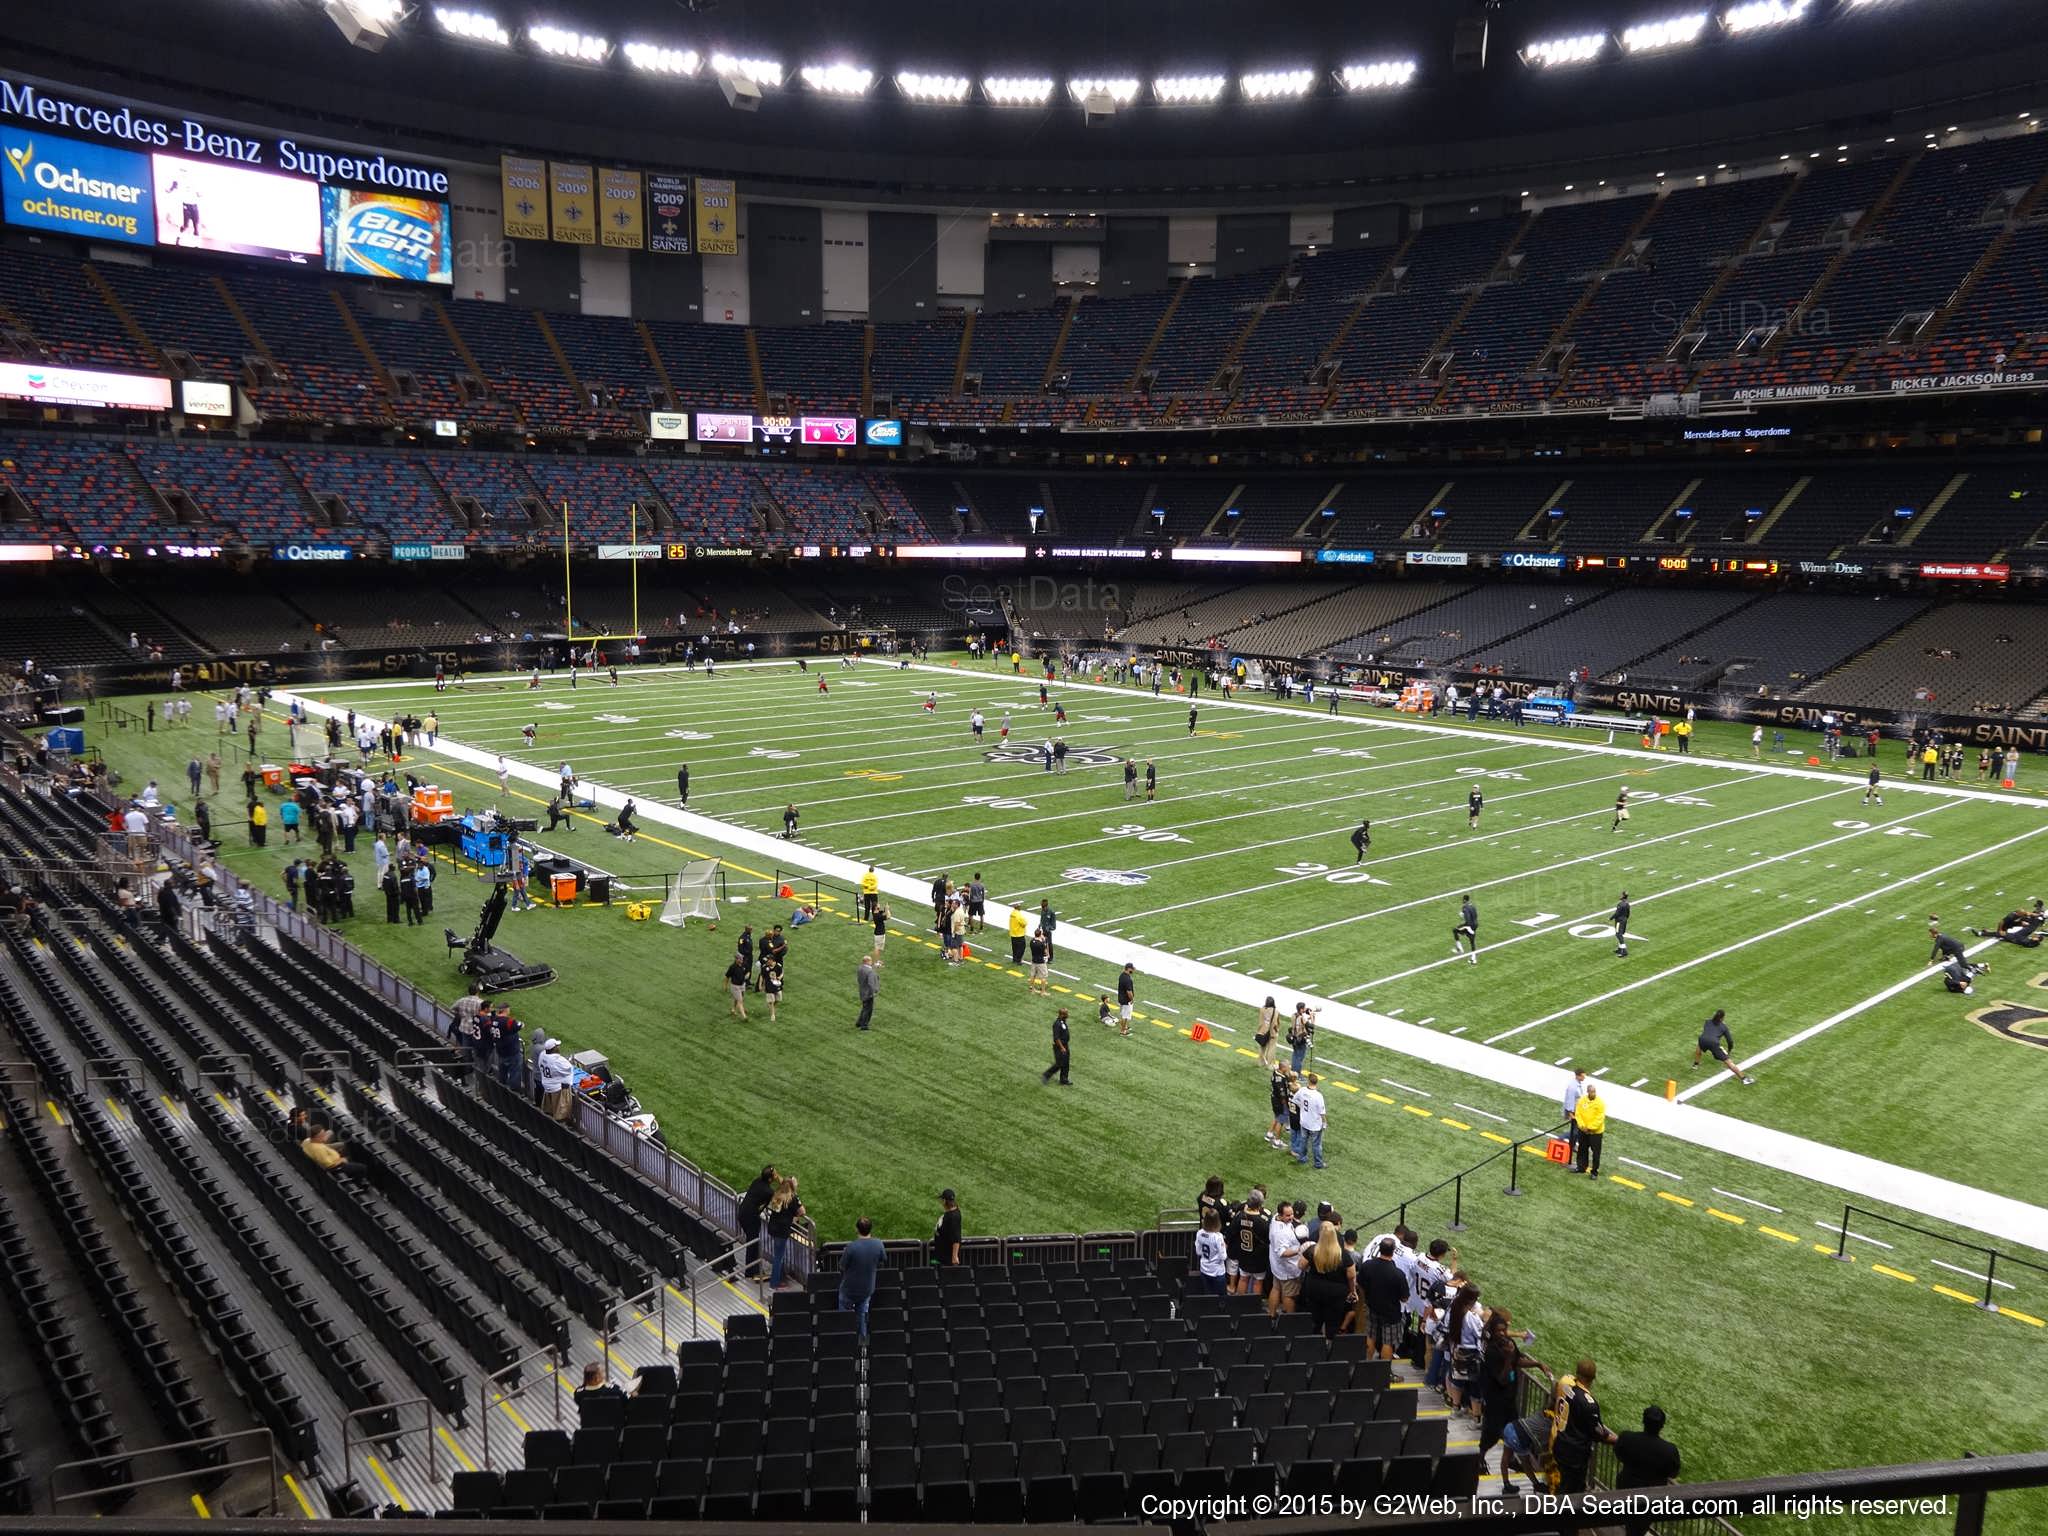 Seat view from section 253 at the Mercedes-Benz Superdome, home of the New Orleans Saints